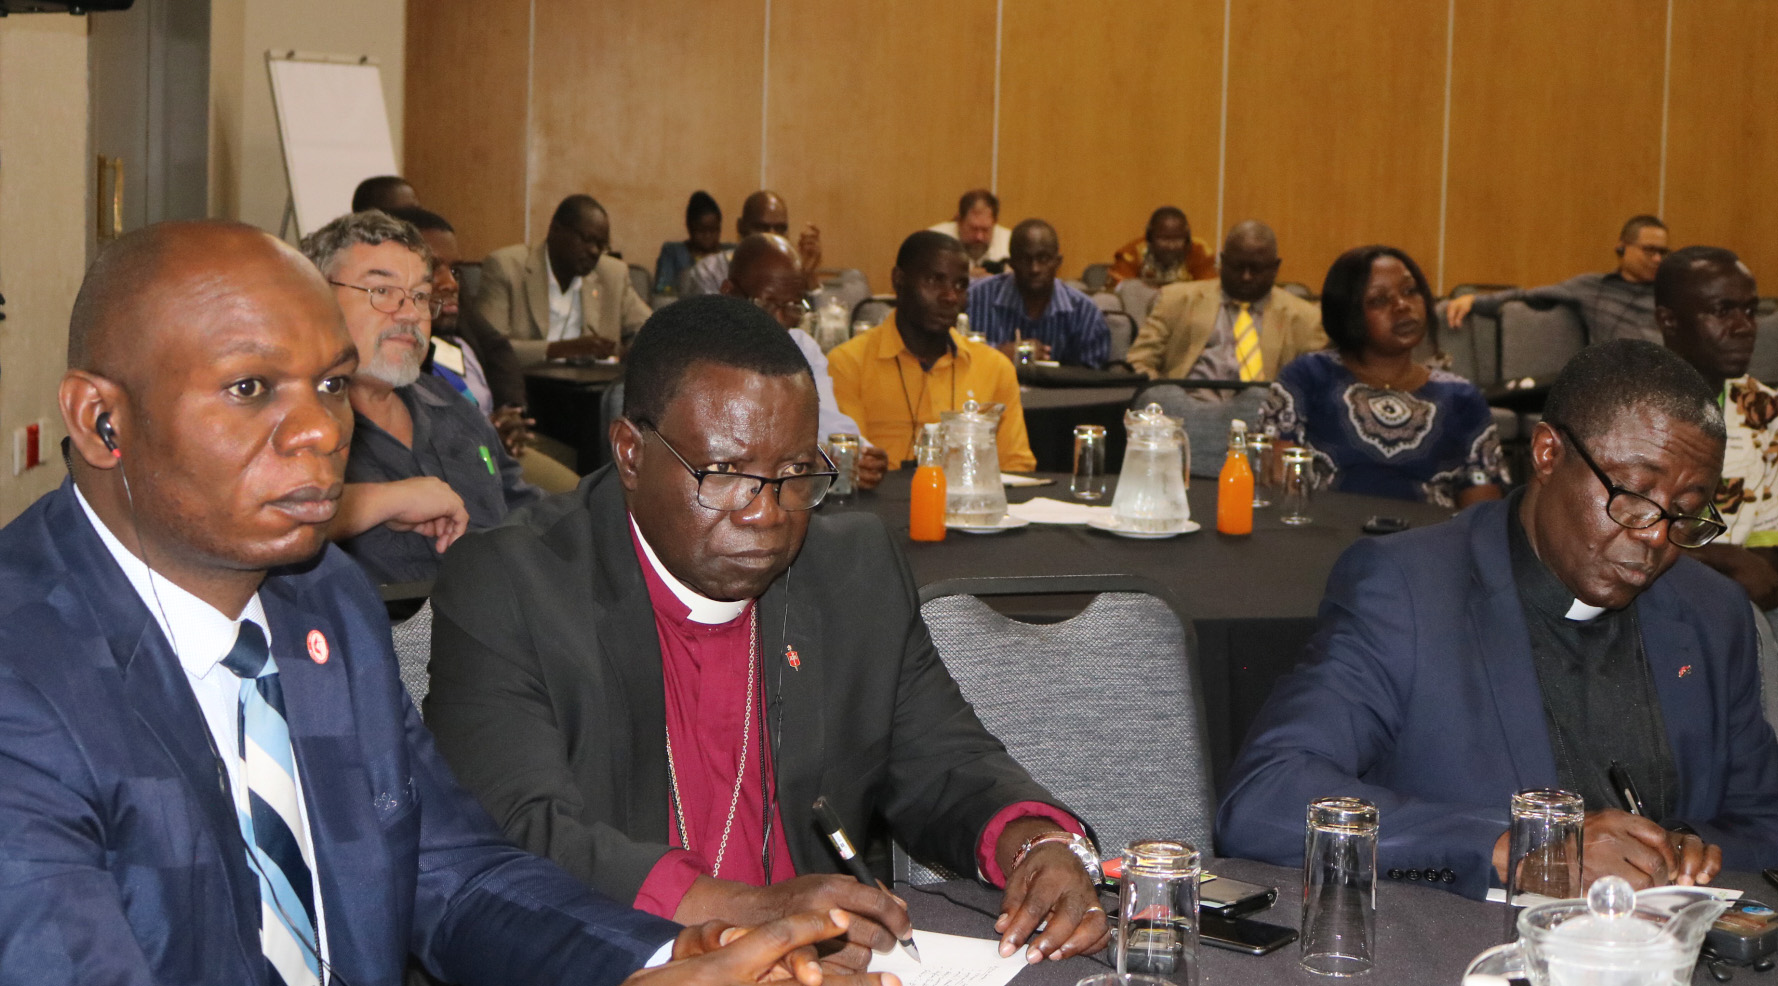 Bishop Kasap Owan from the South Congo Episcopal area (center) and delegates listen during the United Methodist Board of Global Ministries/United Methodist Committee on Relief agricultural summit in Johannesburg. Photo by Eveline Chikwanah.